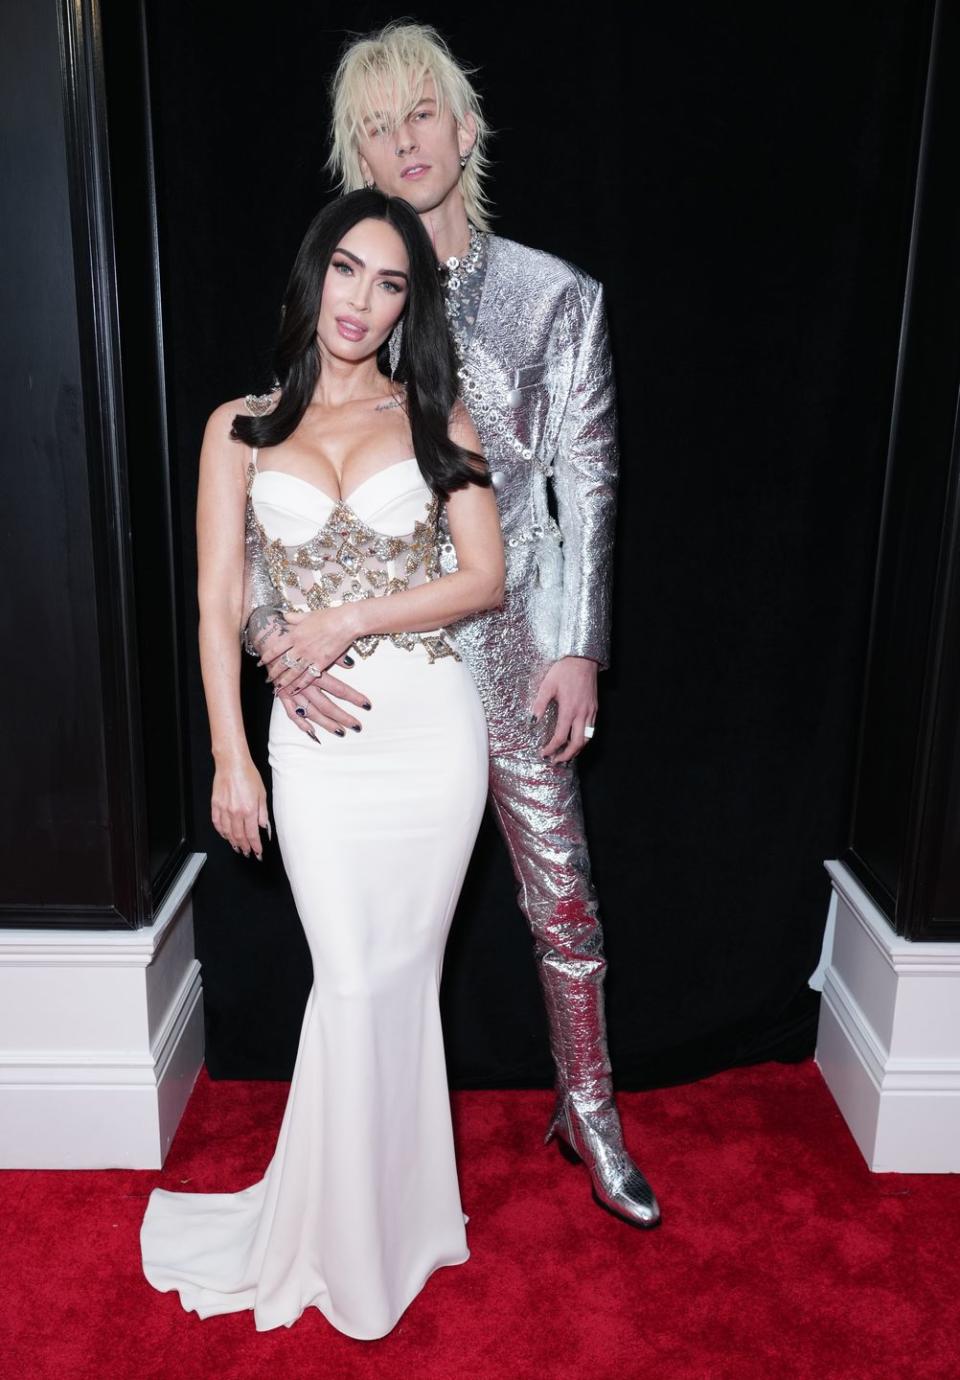 los angeles, california february 05 l r megan fox and machine gun kelly attend the 65th grammy awards on february 05, 2023 in los angeles, california photo by kevin mazurgetty images for the recording academy